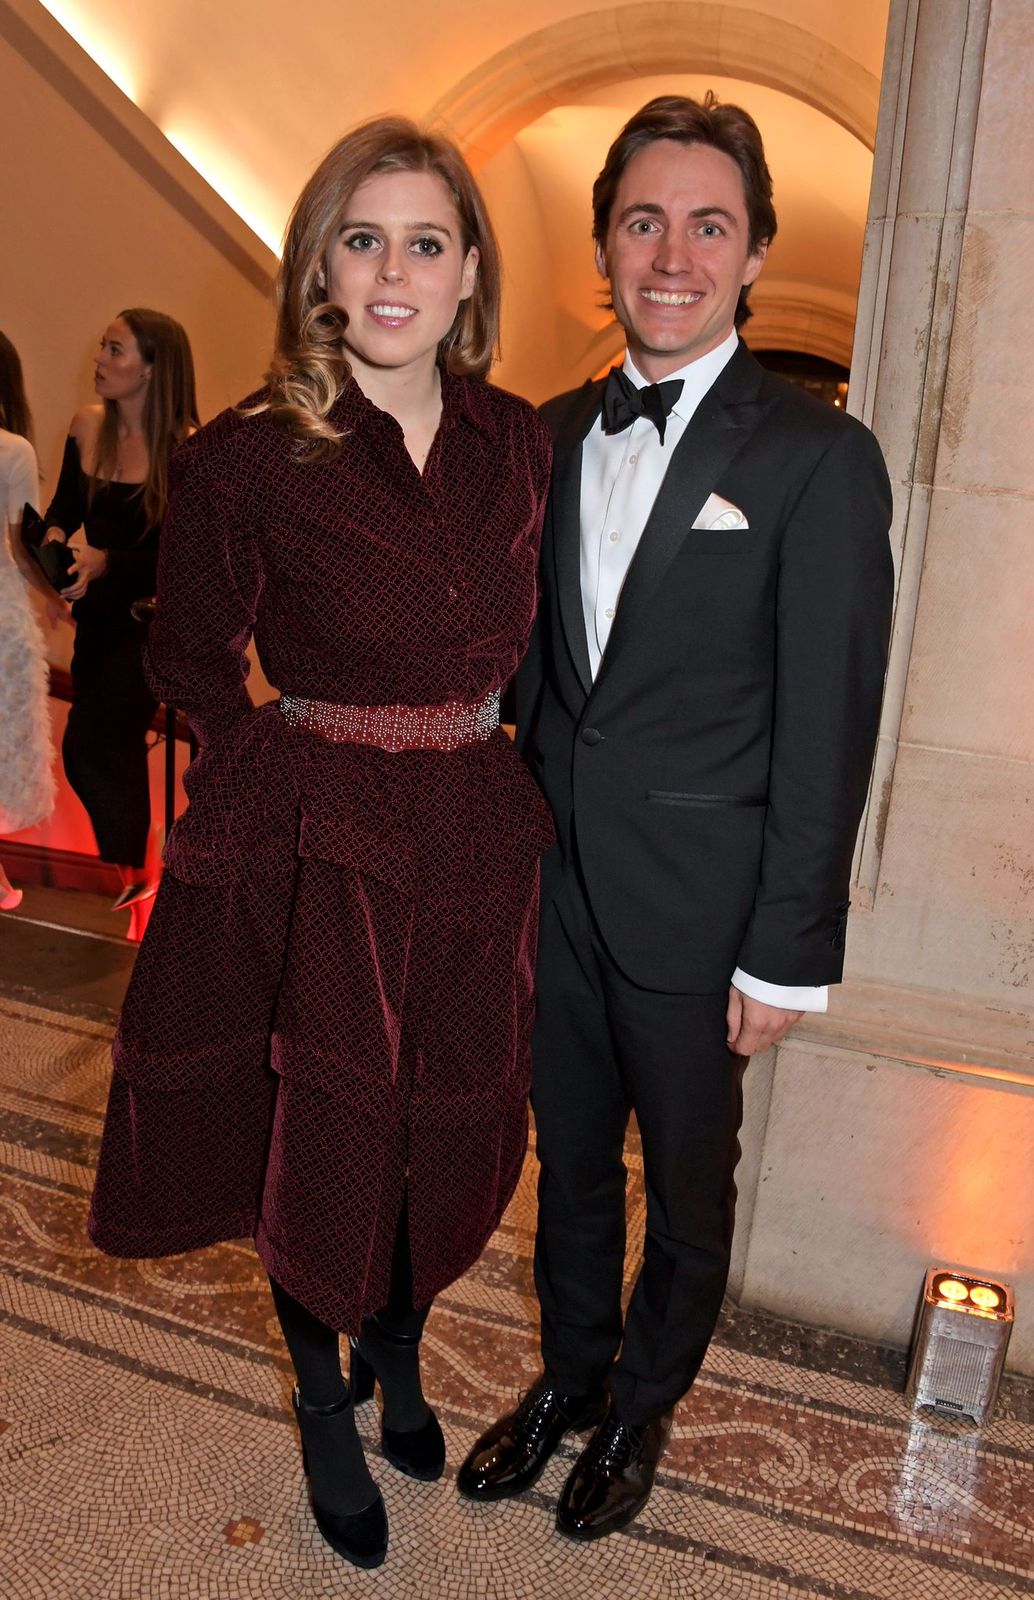 Princess Beatrice and Edoardo Mapelli Mozzi at The Portrait Gala held at the National Portrait Gallery on March 12, 2019, in London, England | Photo: David M. Benett/Dave Benett/Getty Images